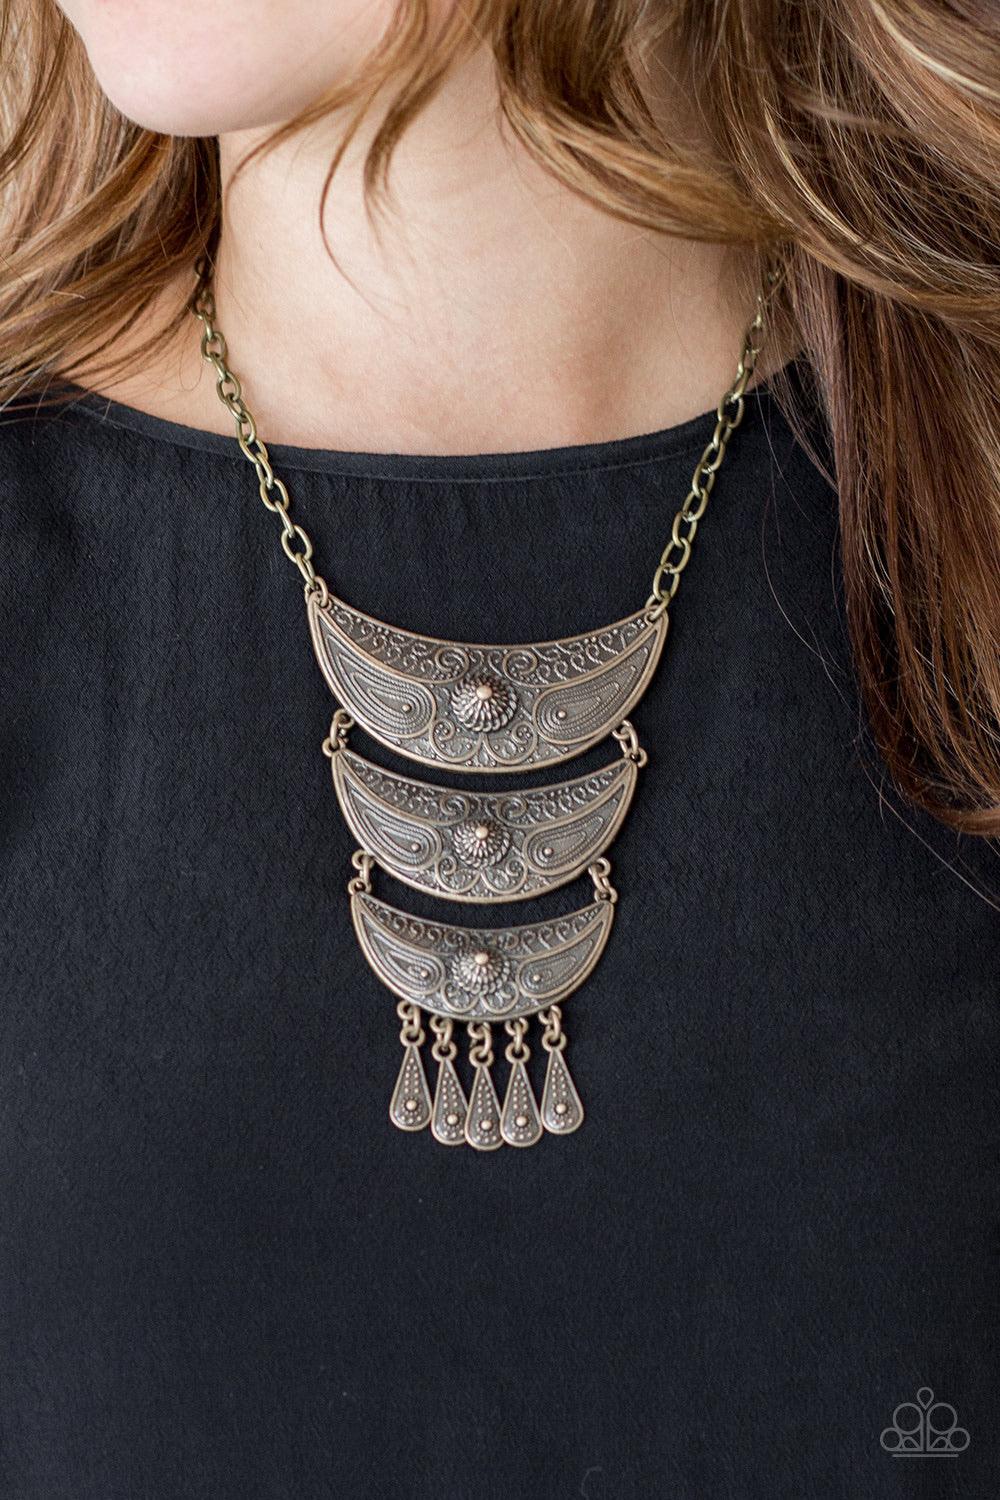 Paparazzi Accessories Go STEER - Crazy - Brass Gradually decreasing in size down the chest, decorative brass crescent plates connect into a bold pendant. Dotted in dainty studs, teardrop brass frames swing from the bottom of the tribal inspired pendant fo